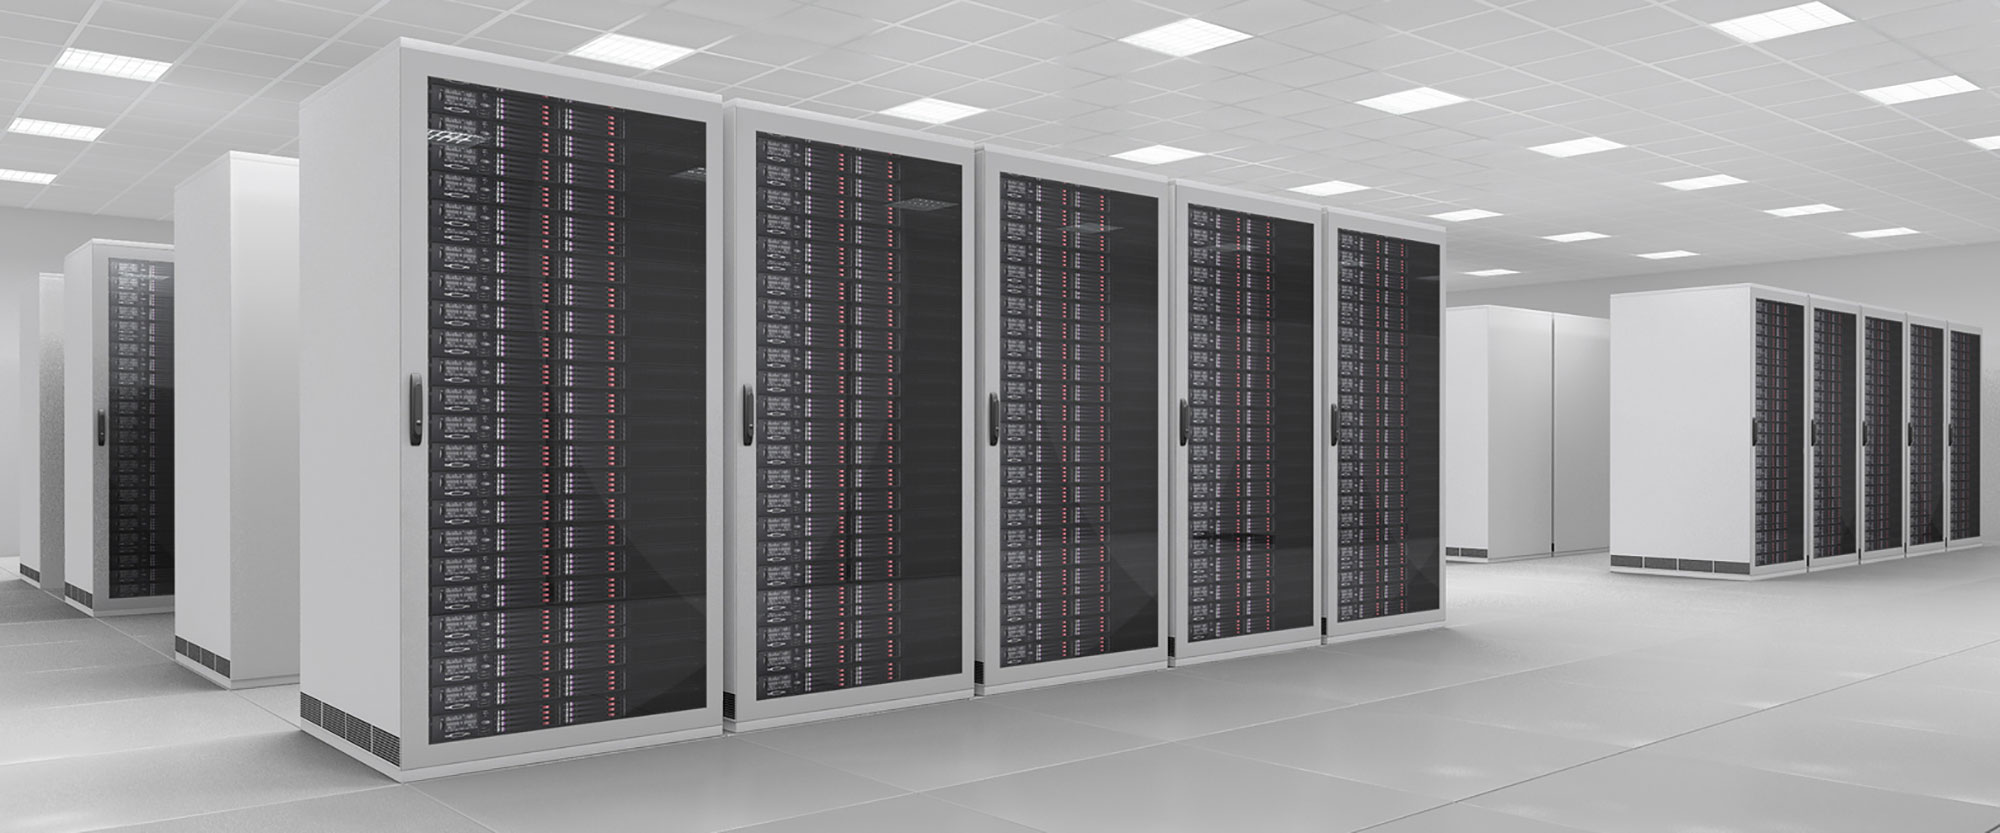 The interior of a modern data centre. Hard drives mounted in rows of racks.